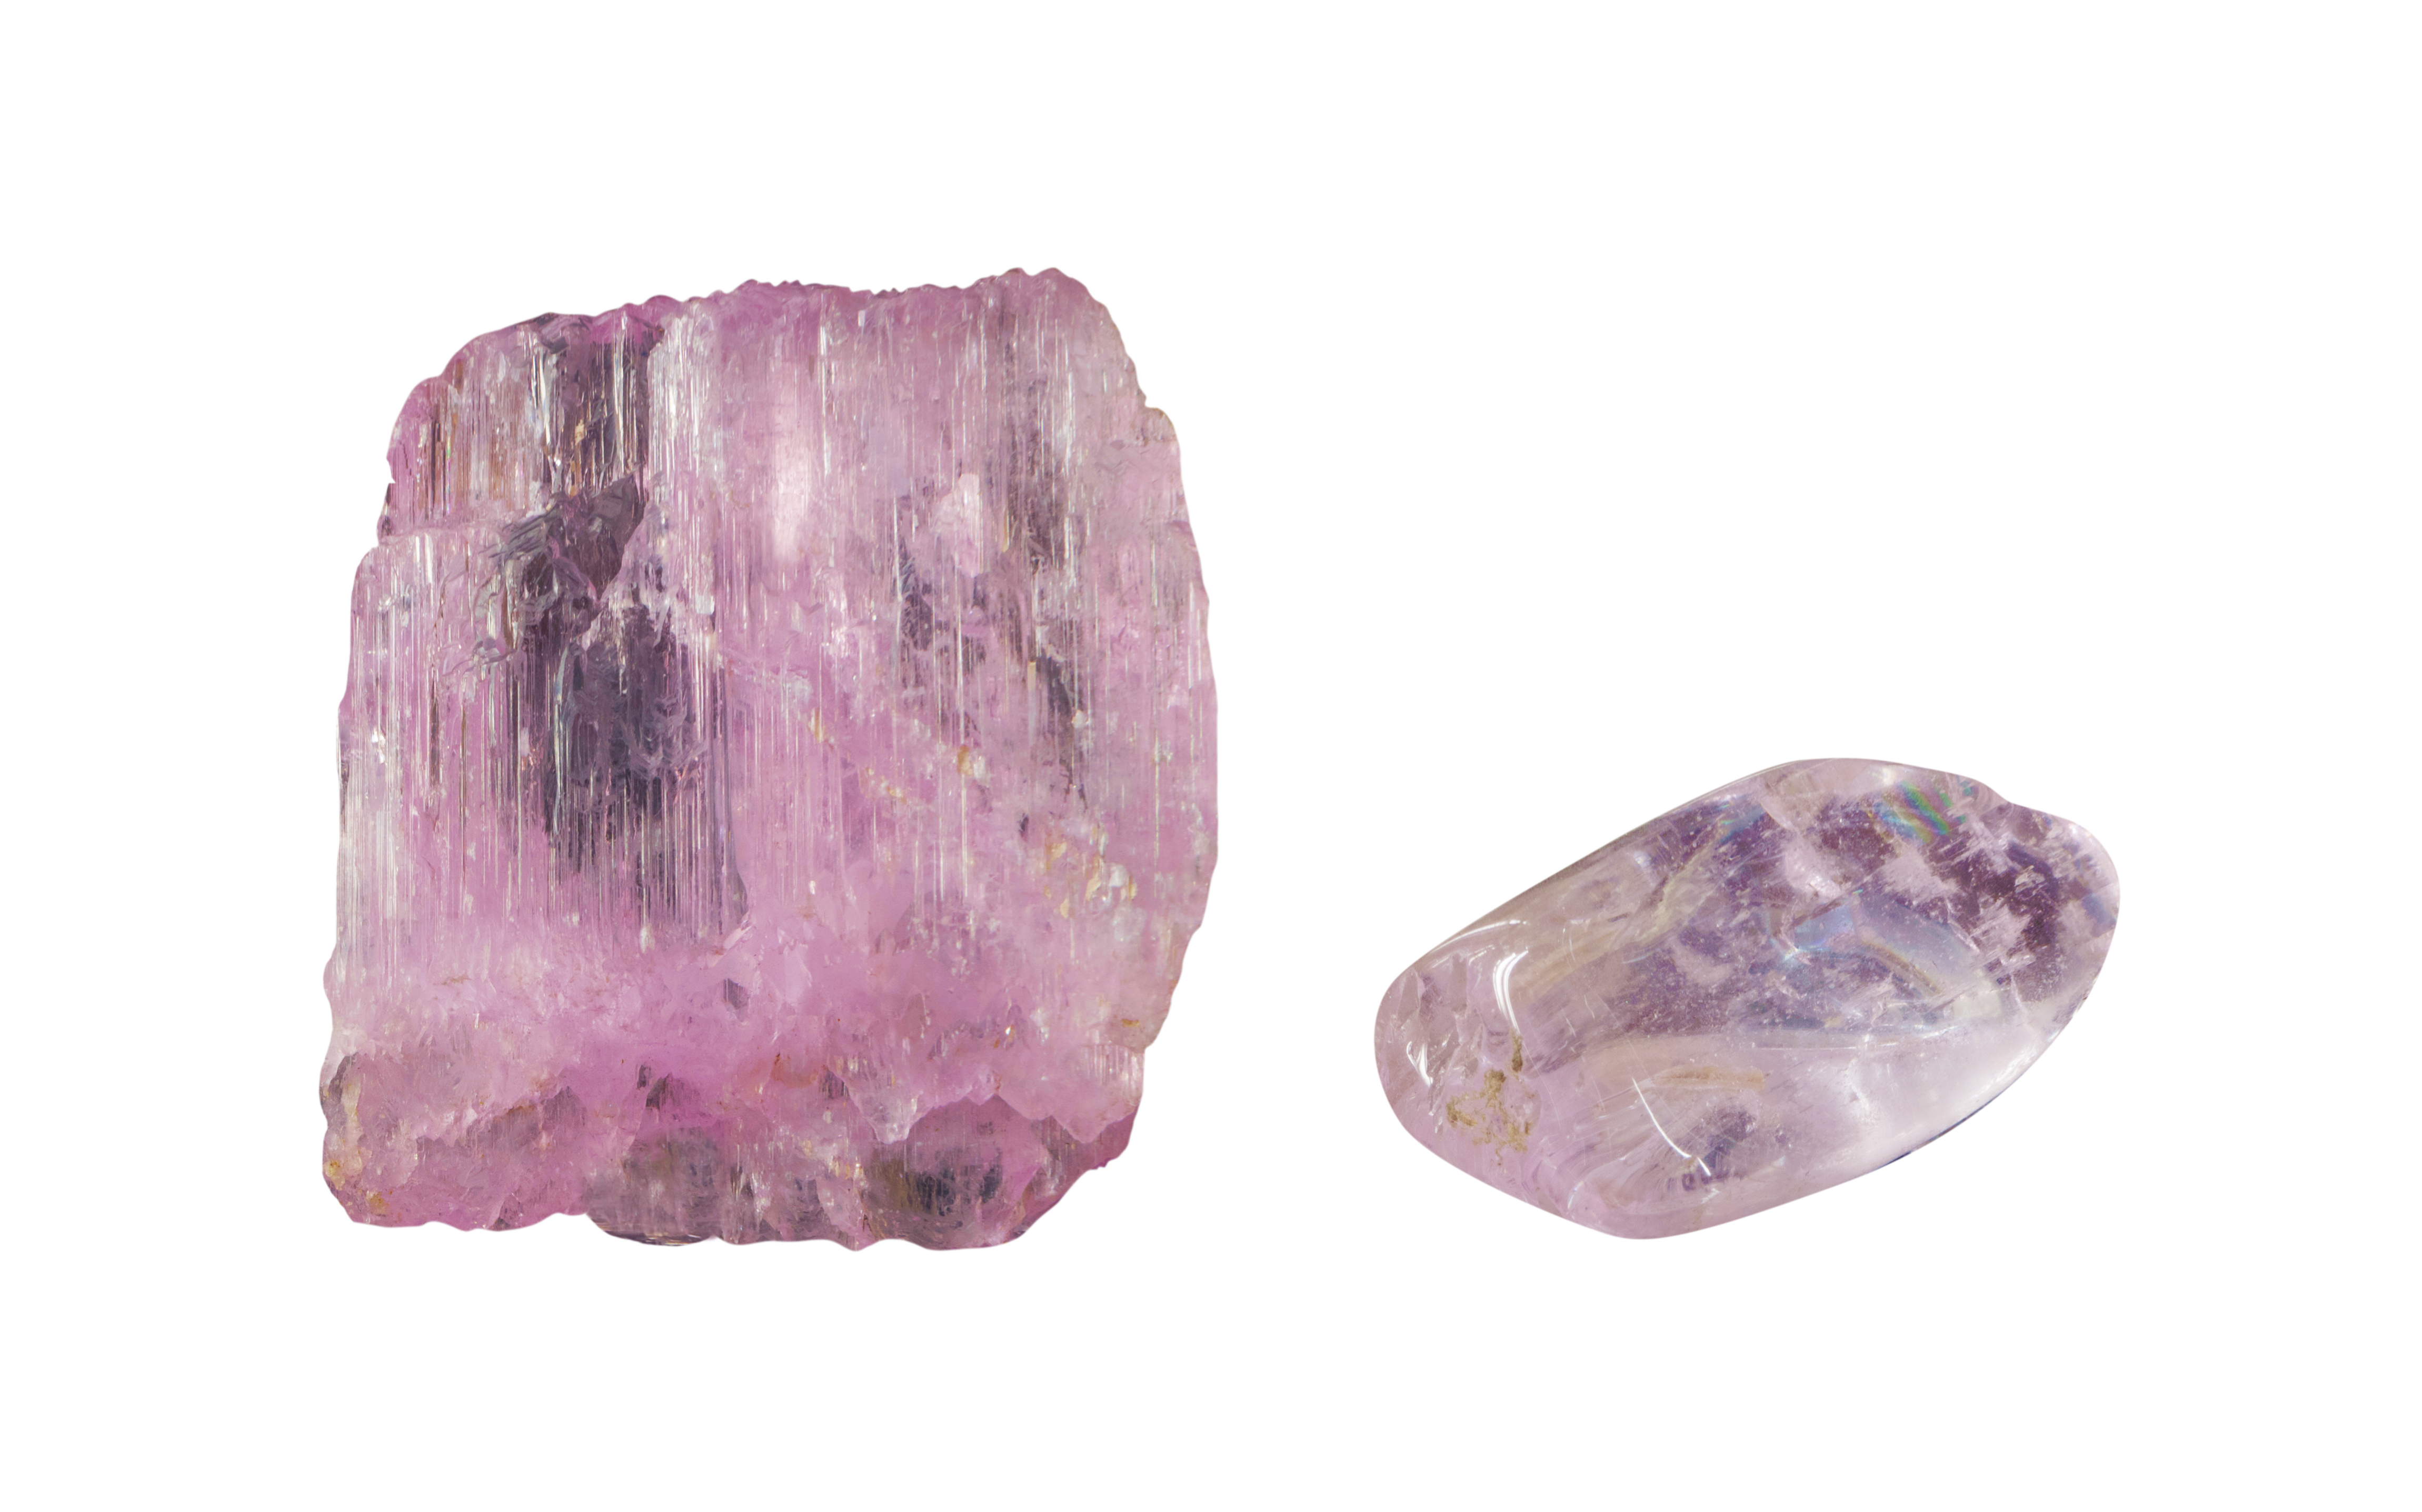 Two pieces of Kunzite